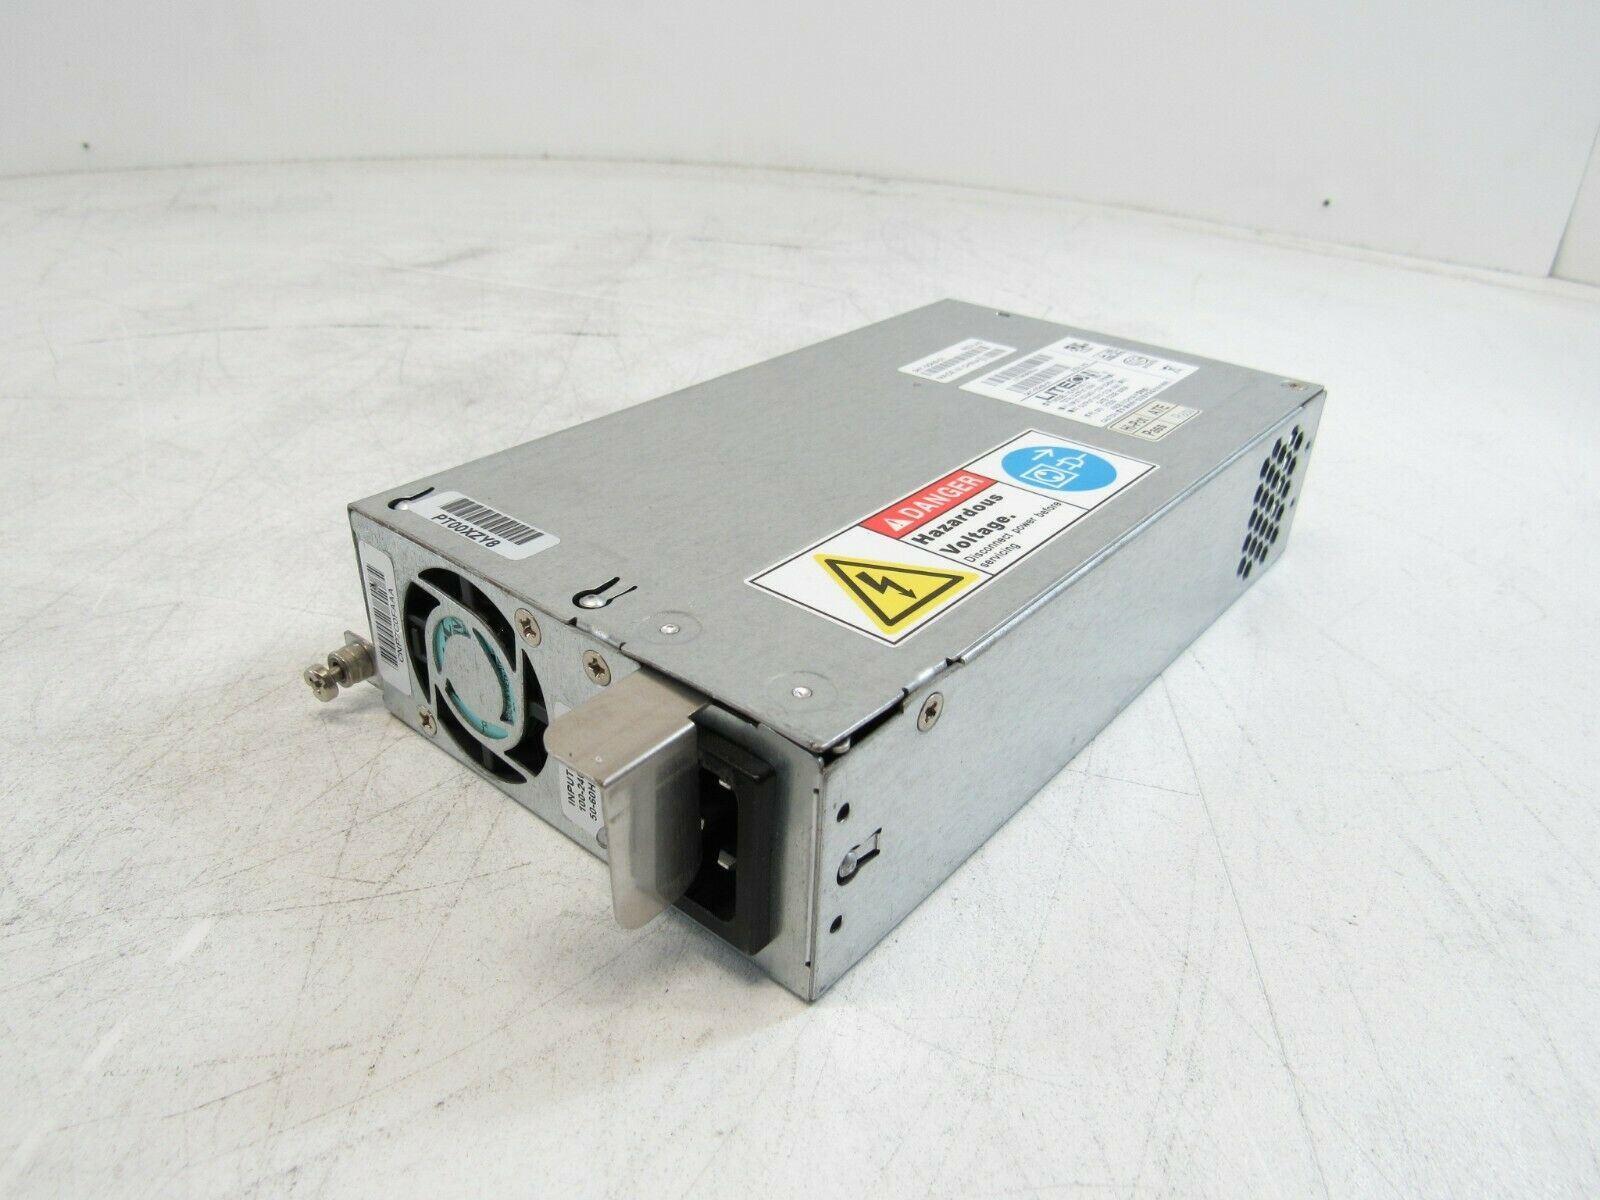 341 0049 01 PA 1151 3 pwr me3750 ac pwr me3750 ac cisco metro catalyst 3750 ac power supply spare